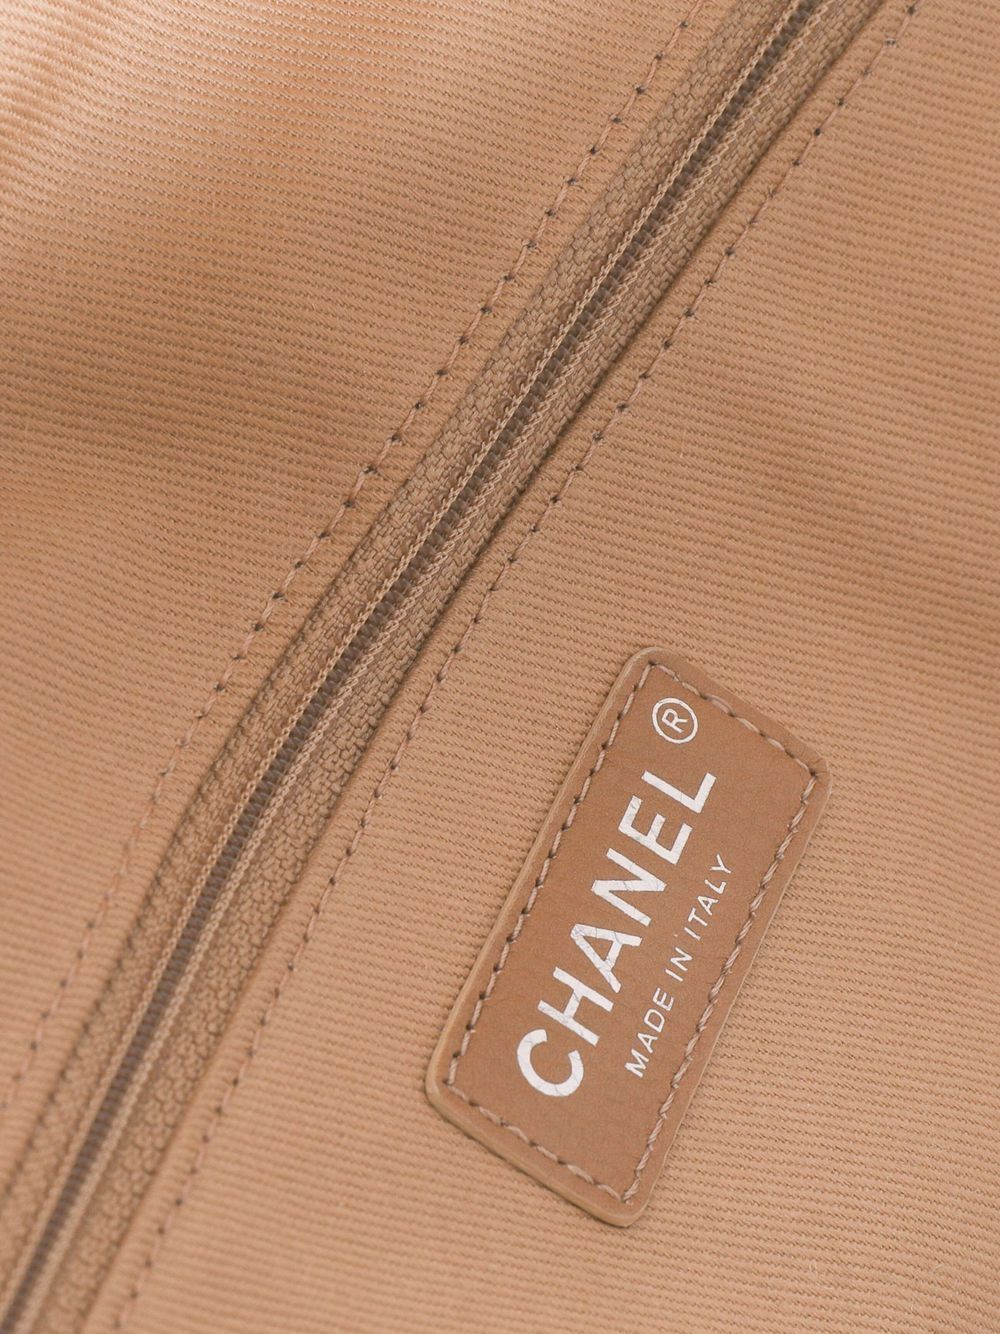 CHANEL Pre-Owned CC diamond-quilted Bowling Bag - Farfetch